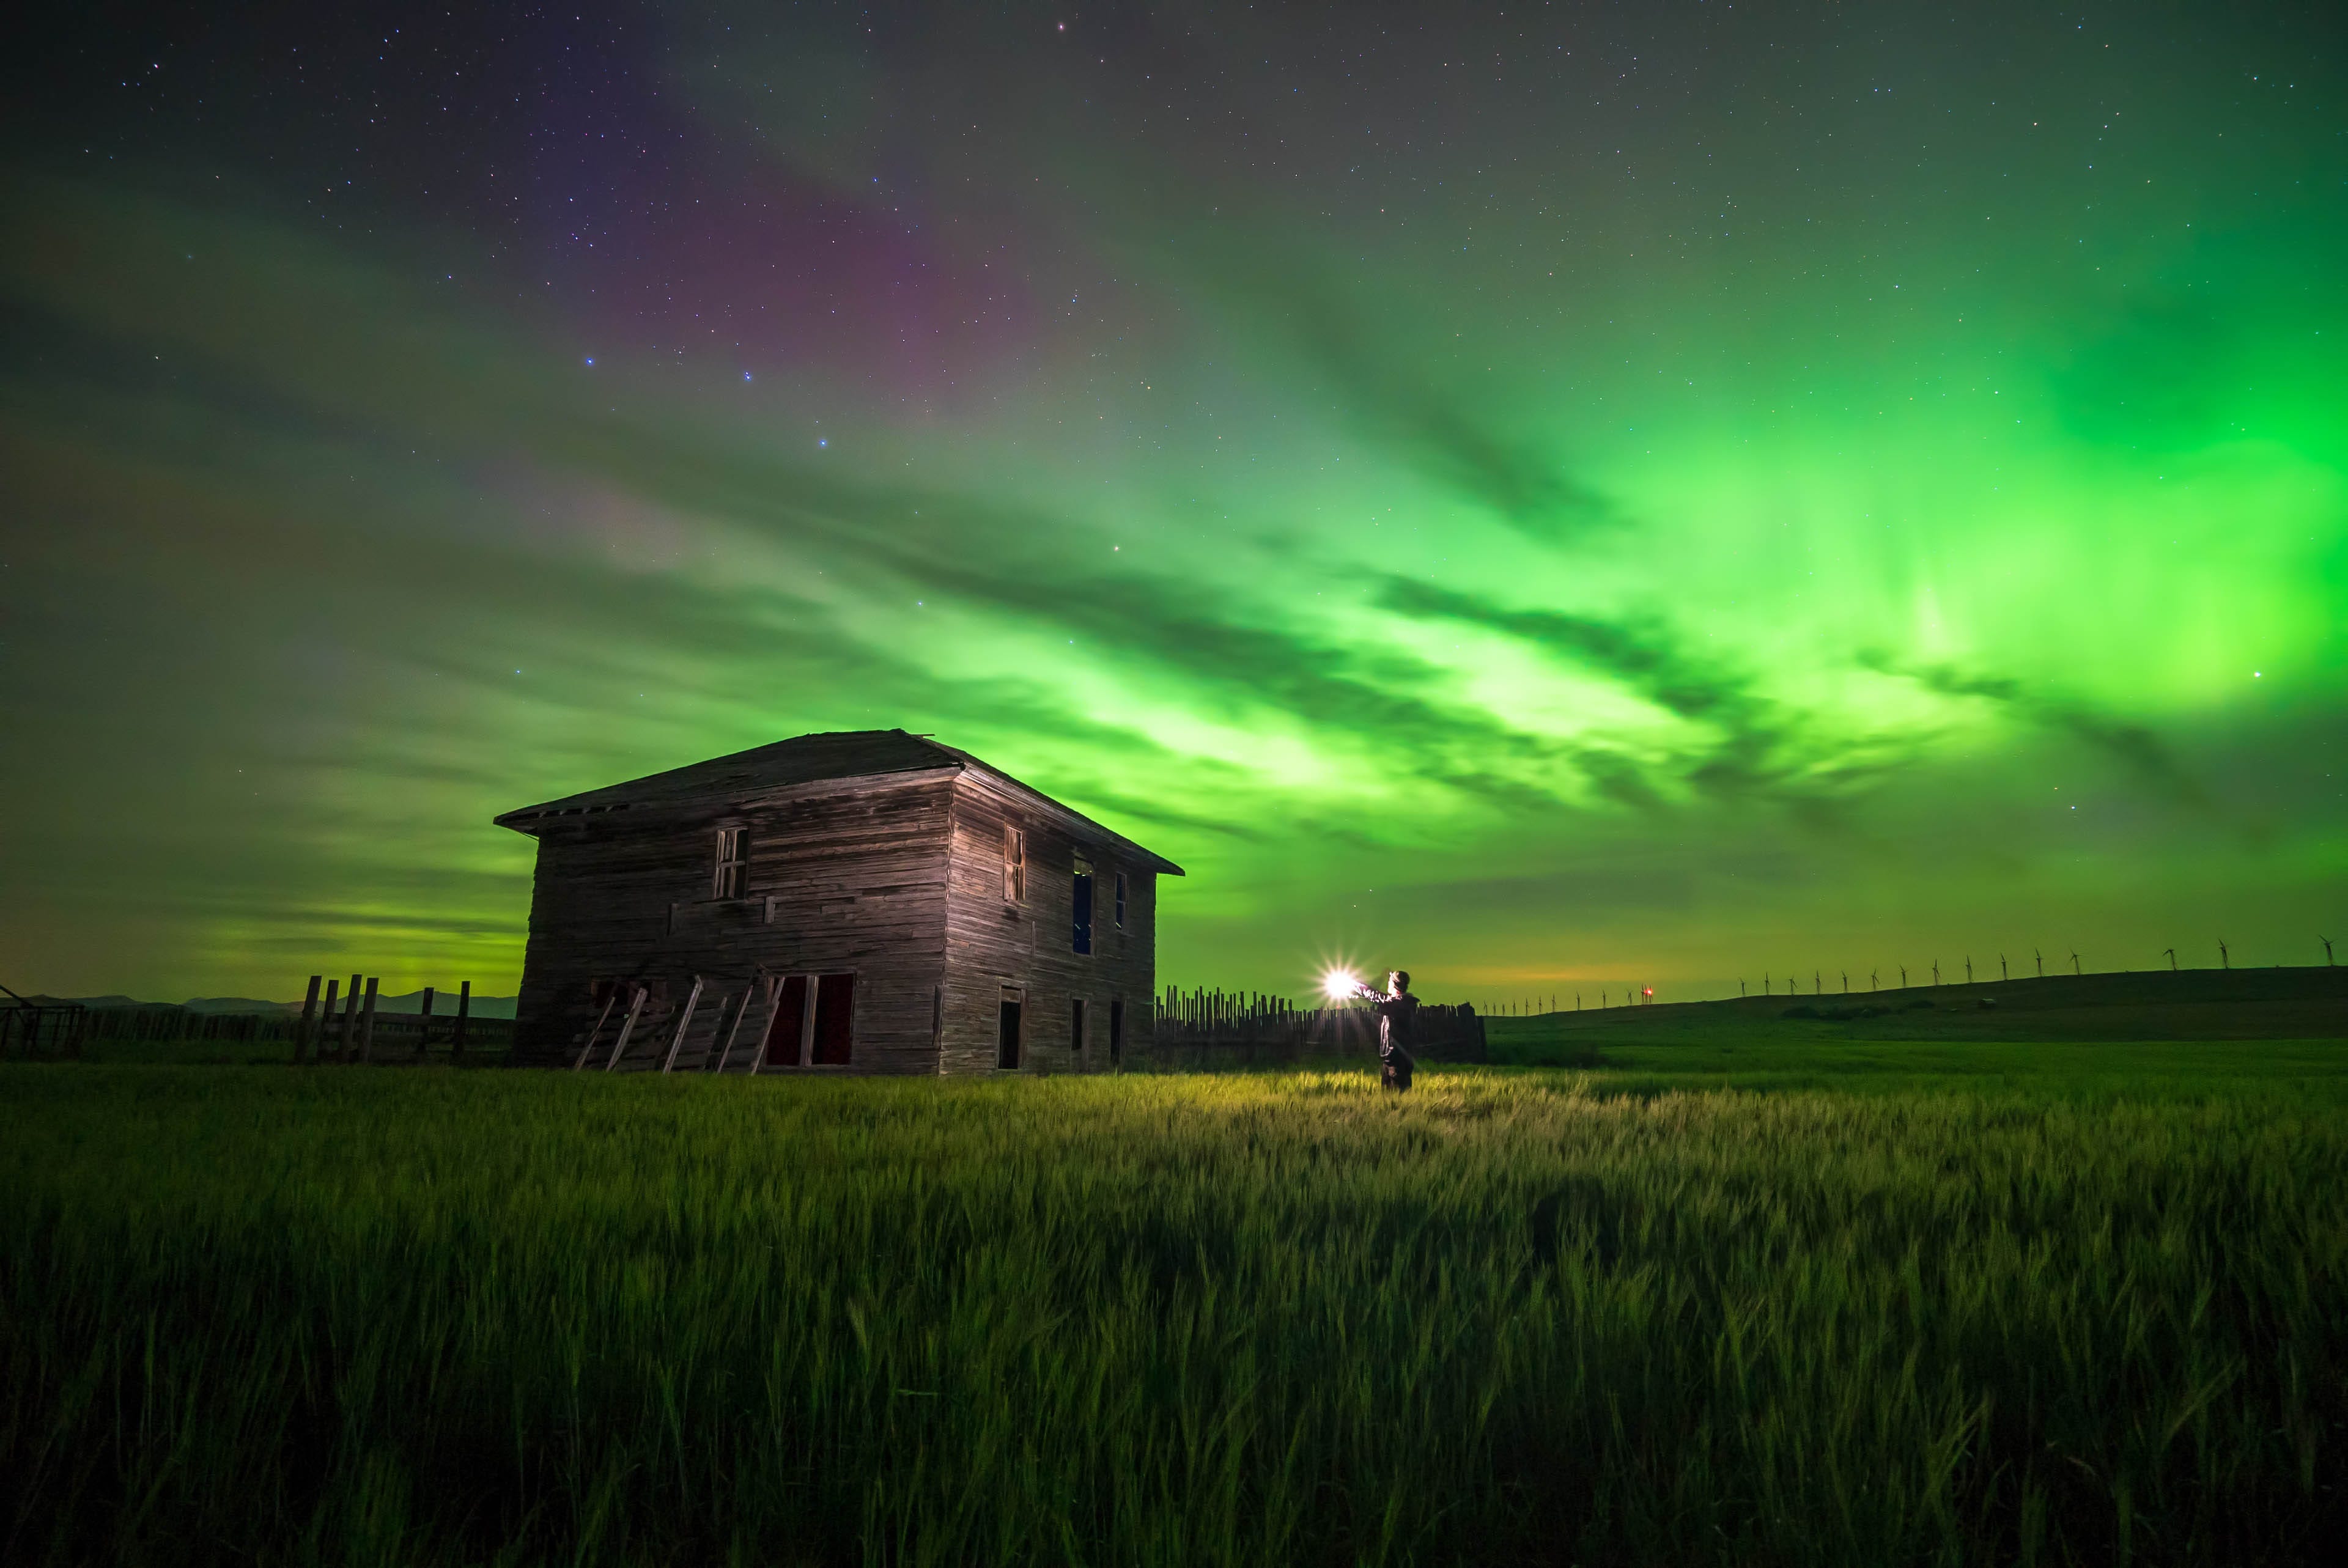 Night shot of a photographer lighting up an abandoned building with the Northern Lights overhead.